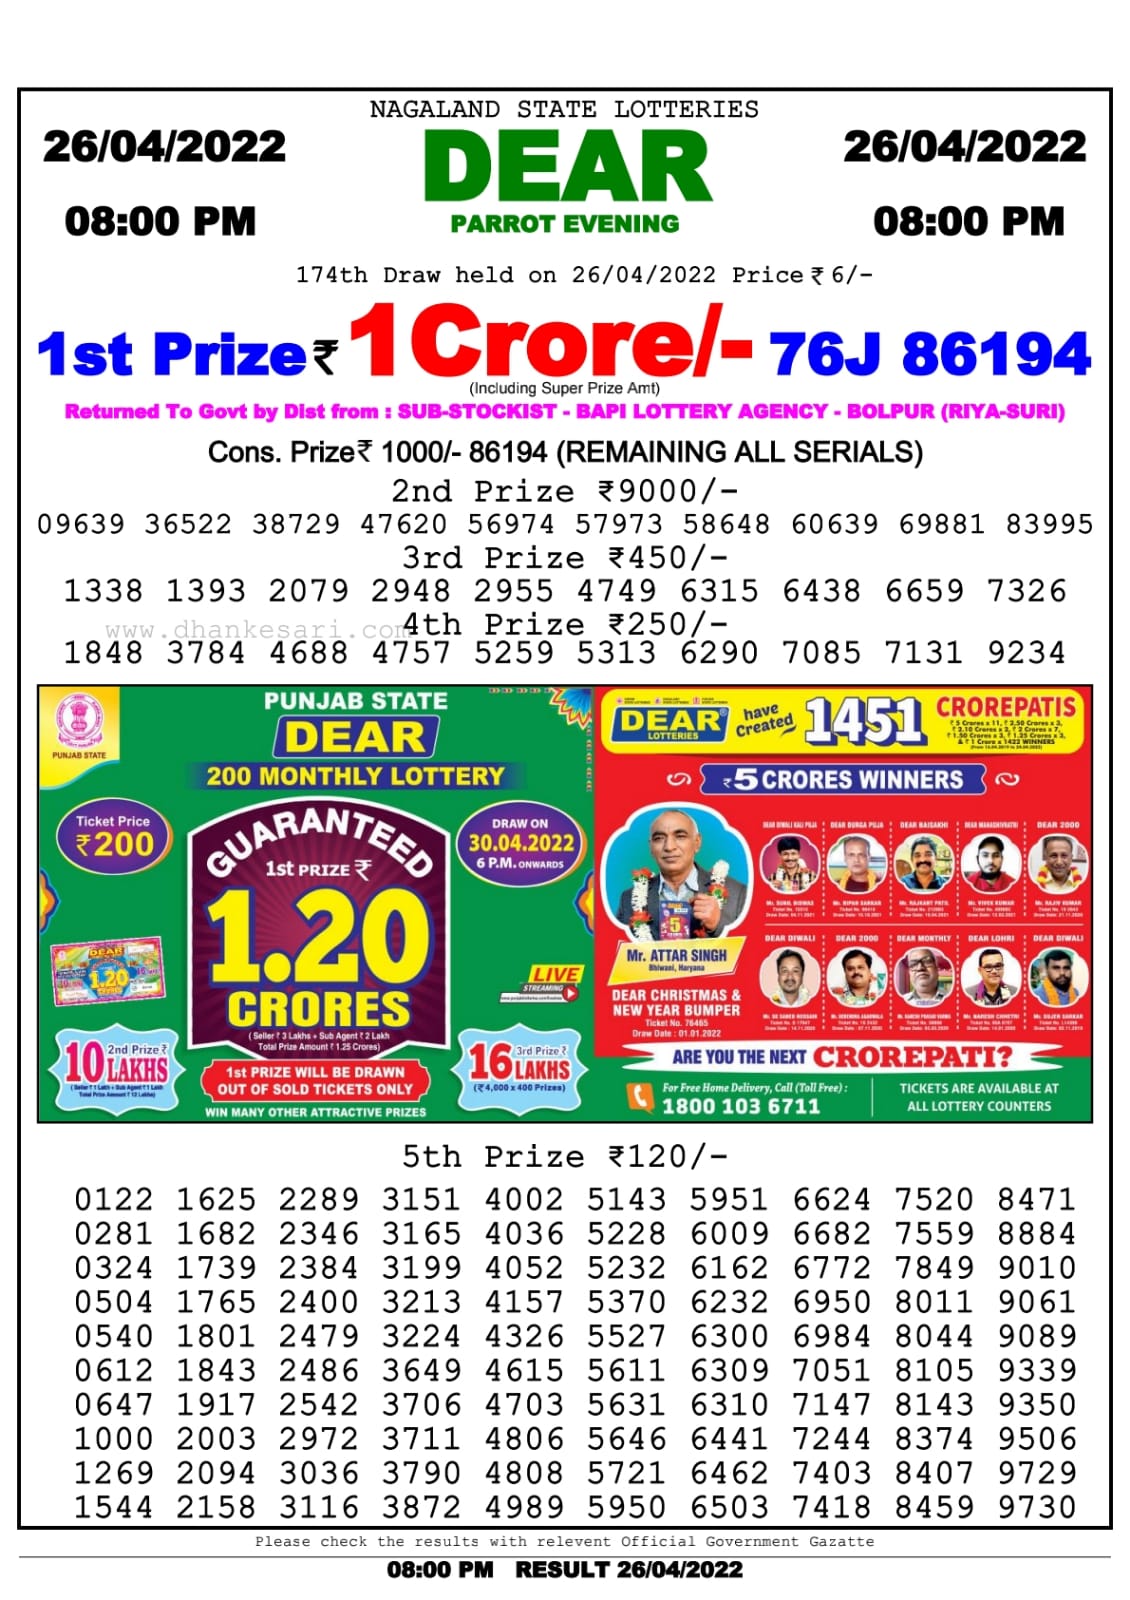 Dear Lottery Nagaland state Lottery Results 08.00 pm 26.04.2022